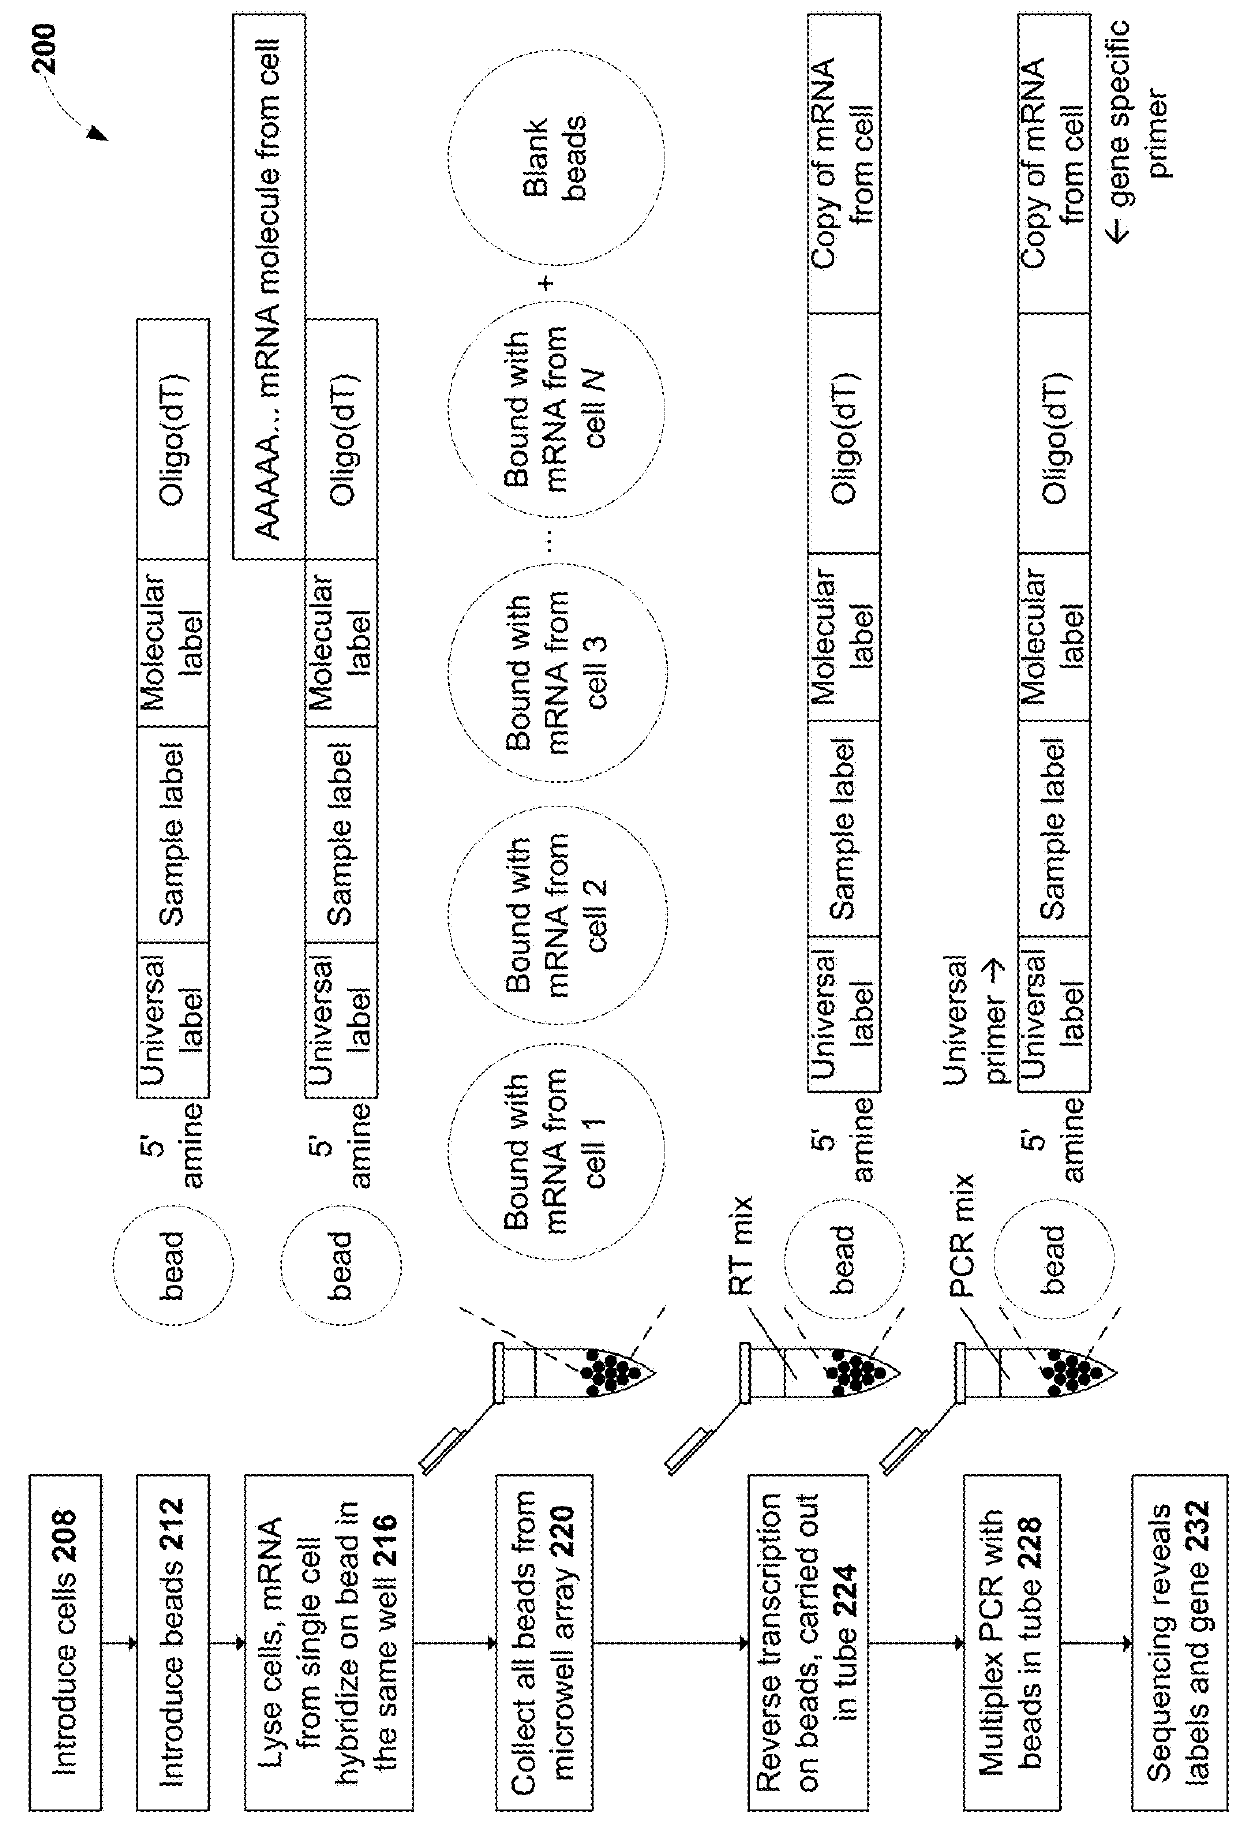 Measurement of protein expression using reagents with barcoded oligonucleotide sequences